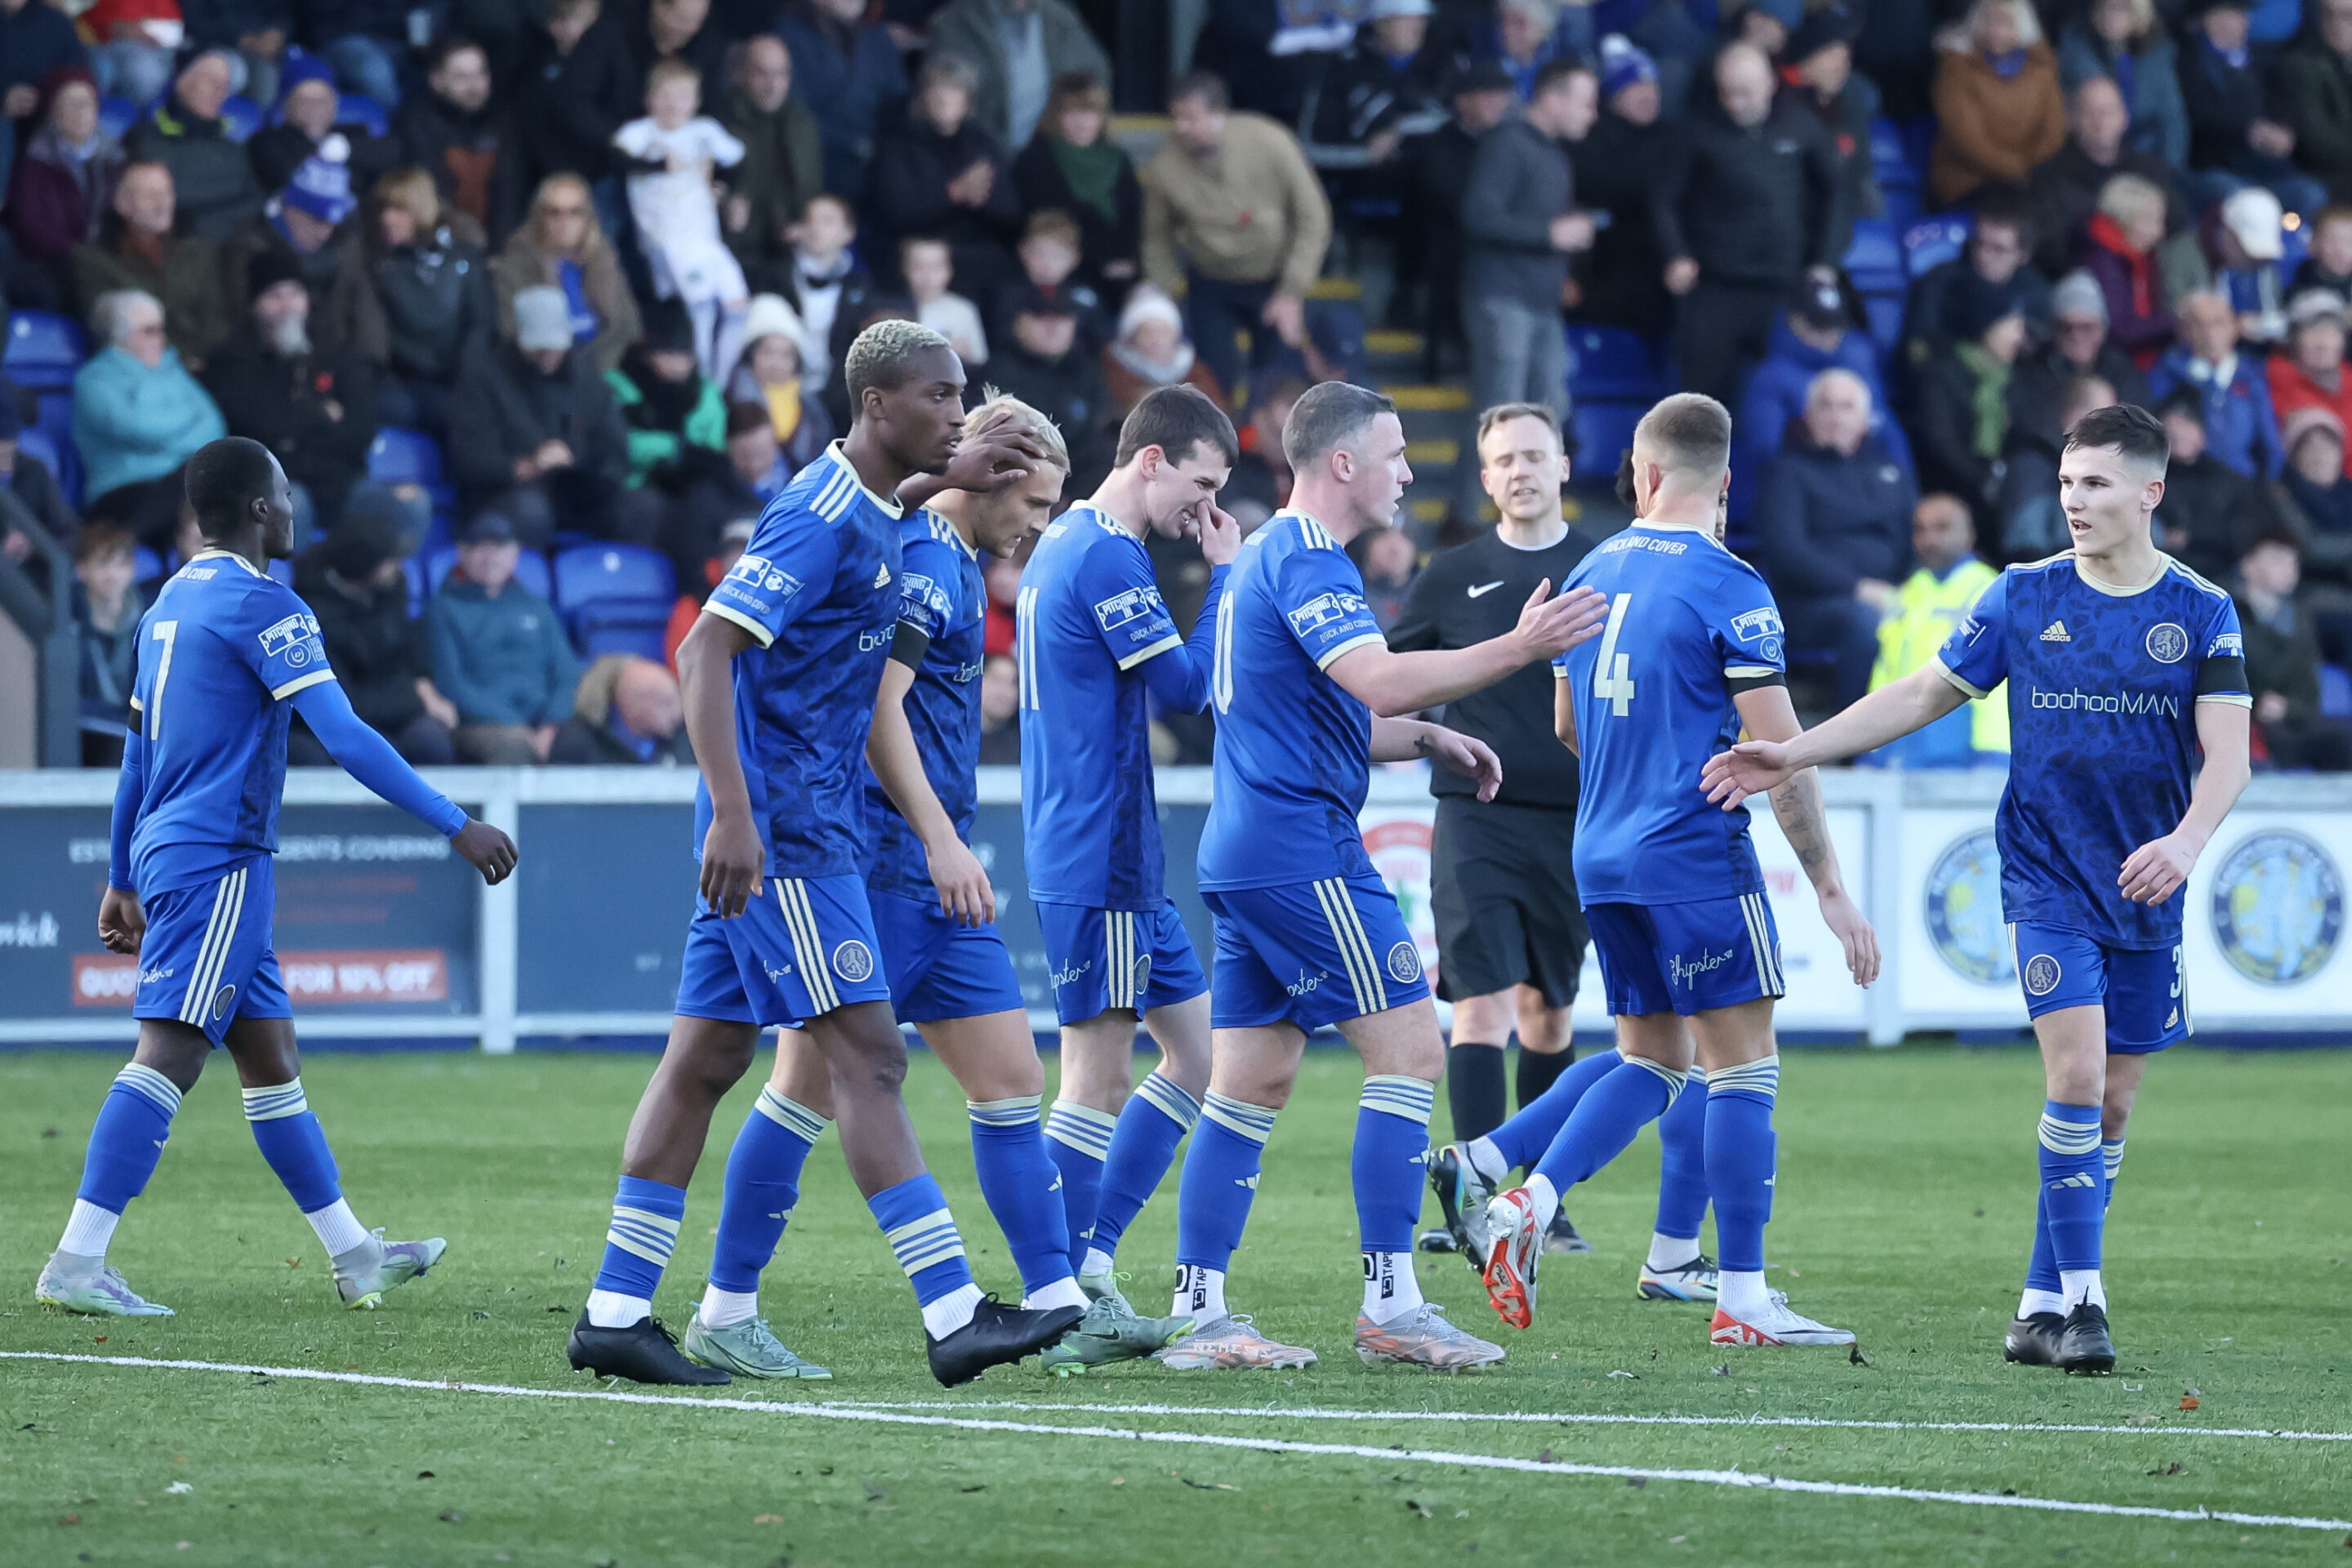 MATCH REPORT: WHITBY TOWN